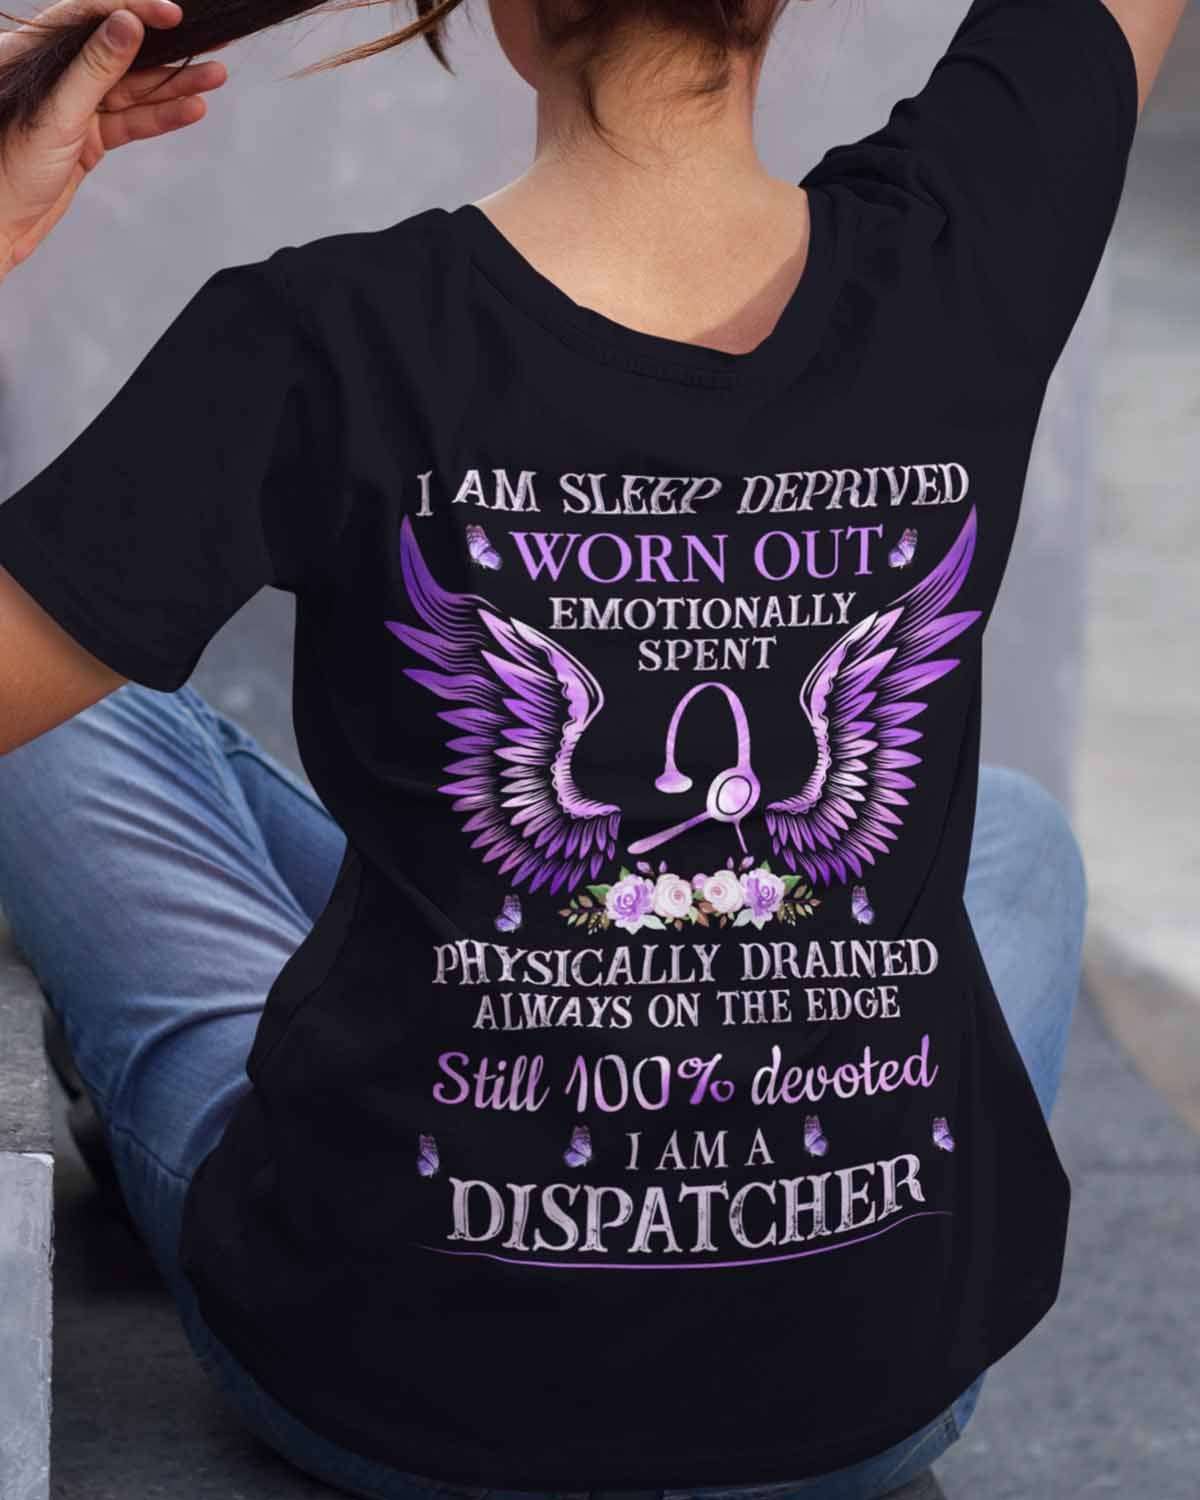 I am sleep deprived worn out emotionally spent physically drained always on the edge i am a dispatcher